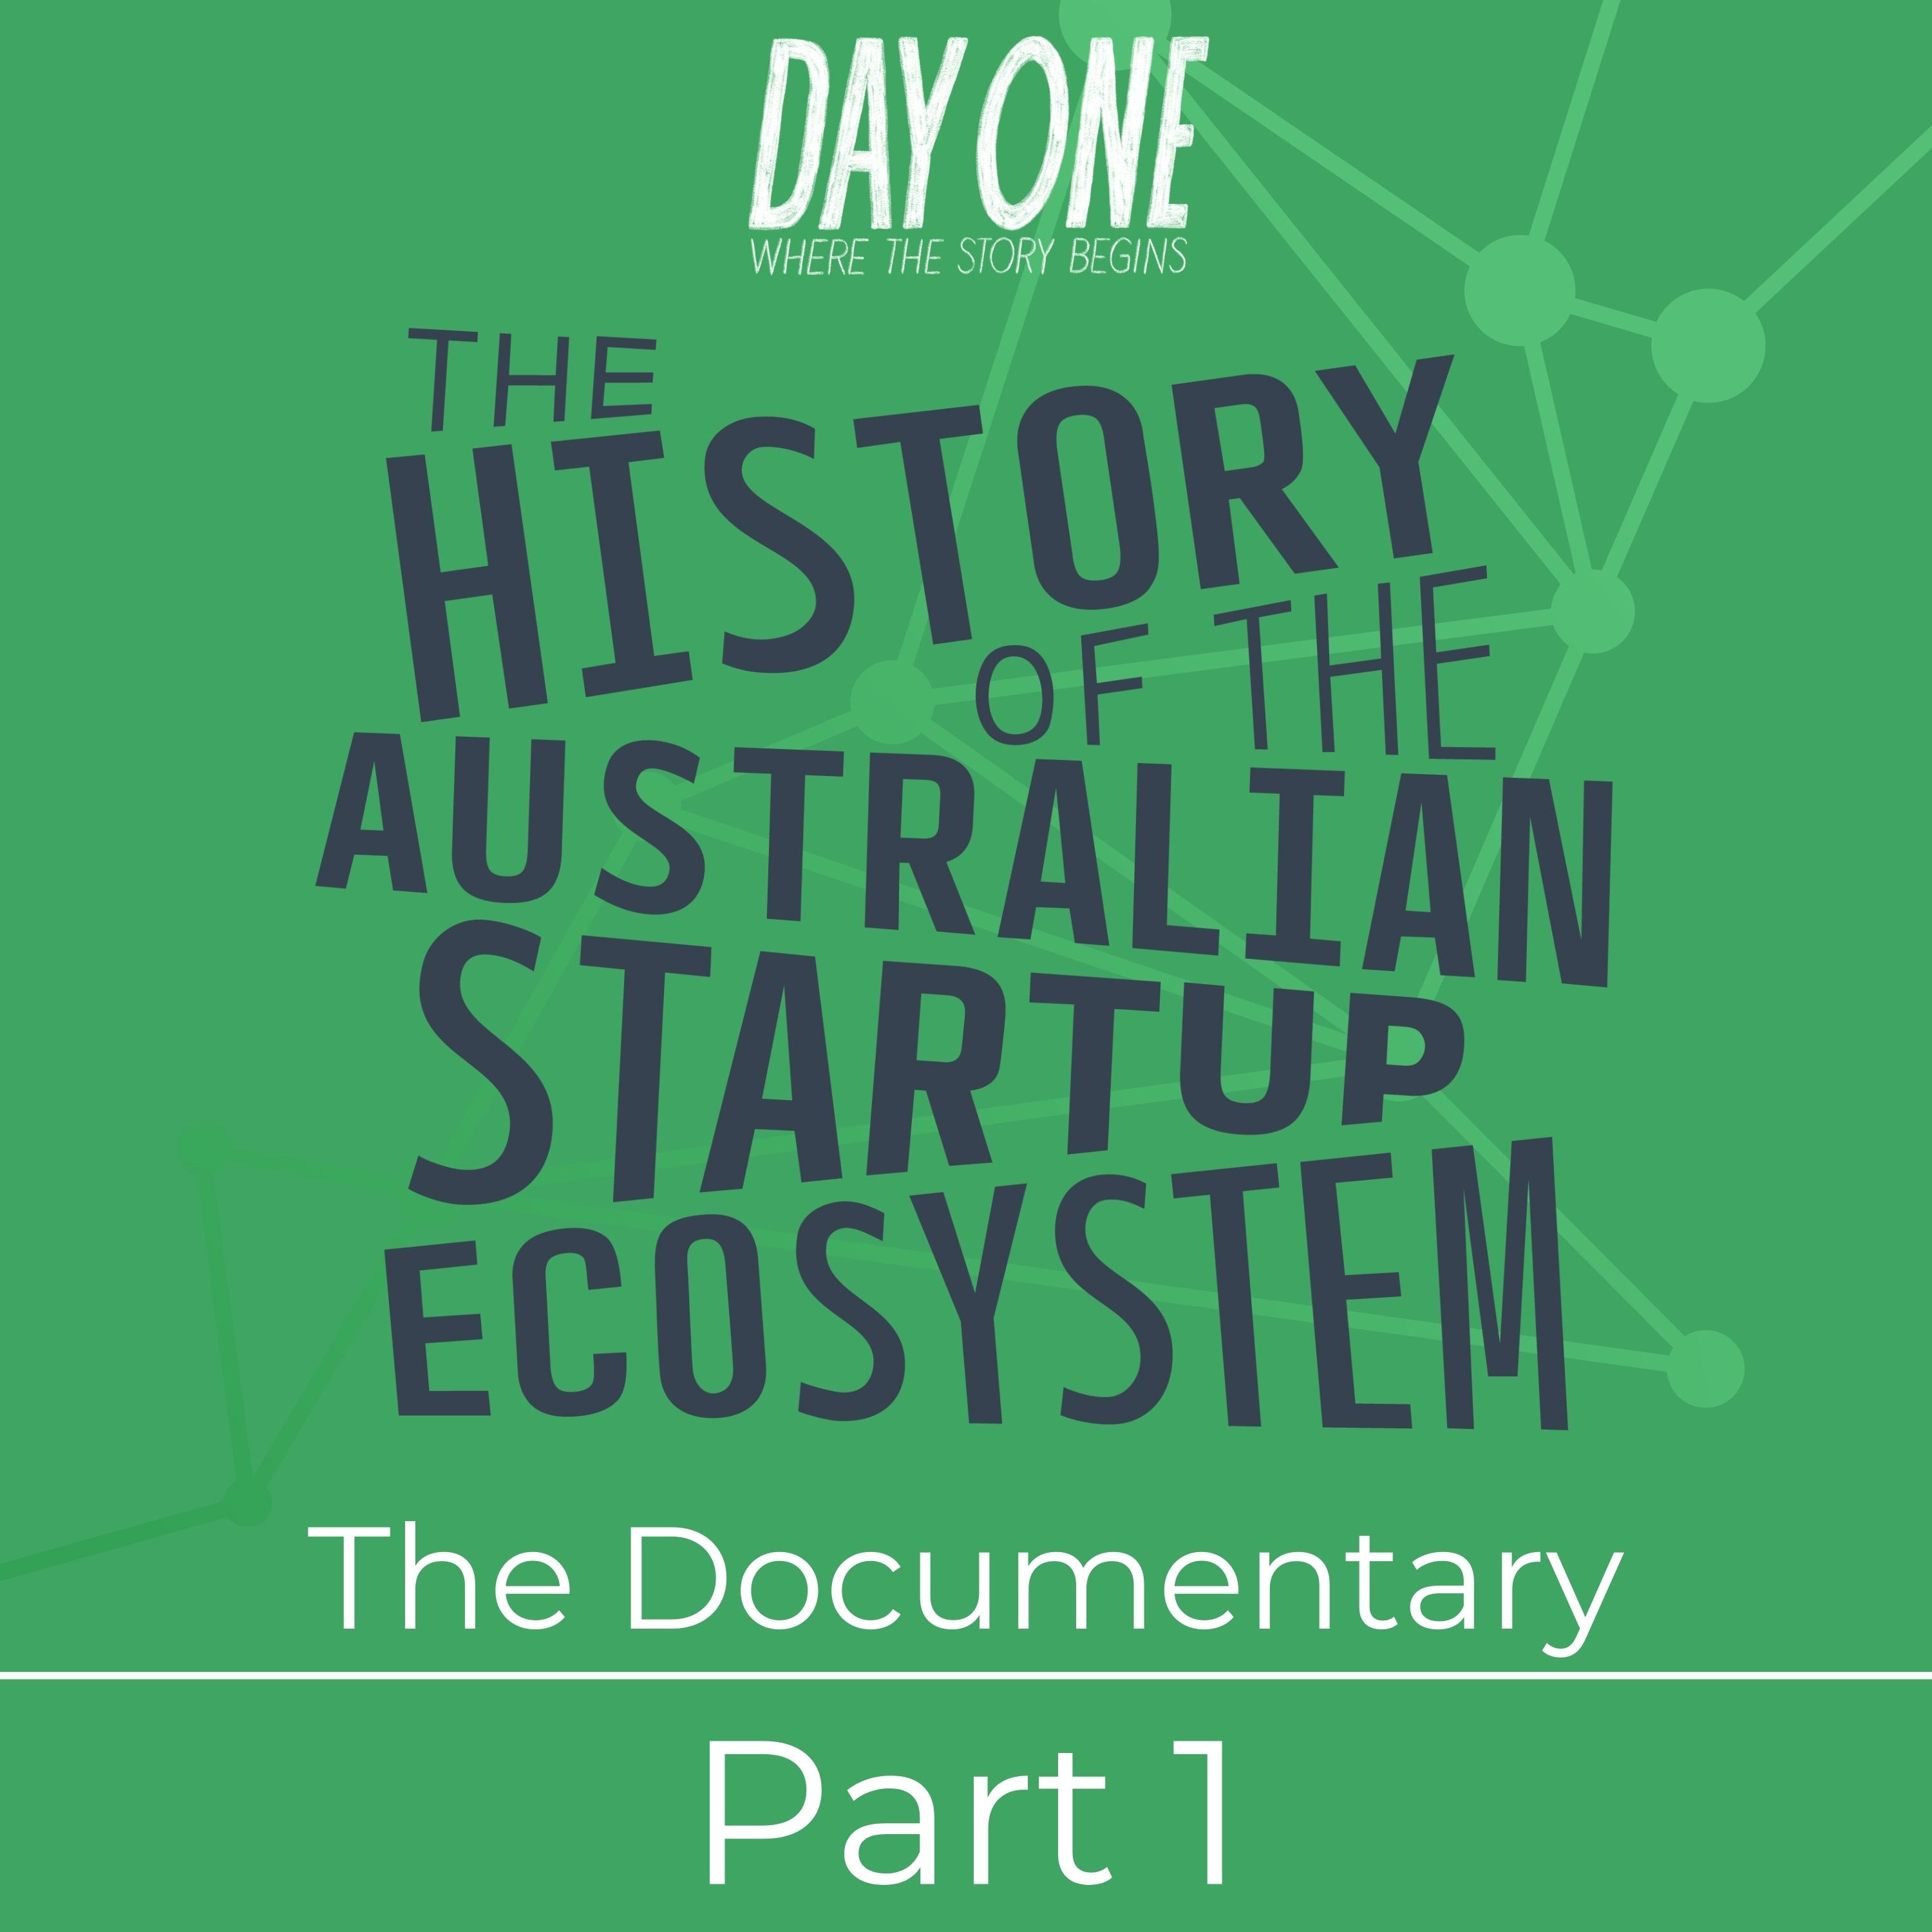 The Documentary: Part 1 - The History of the Australian Startup Ecosystem: Documentary